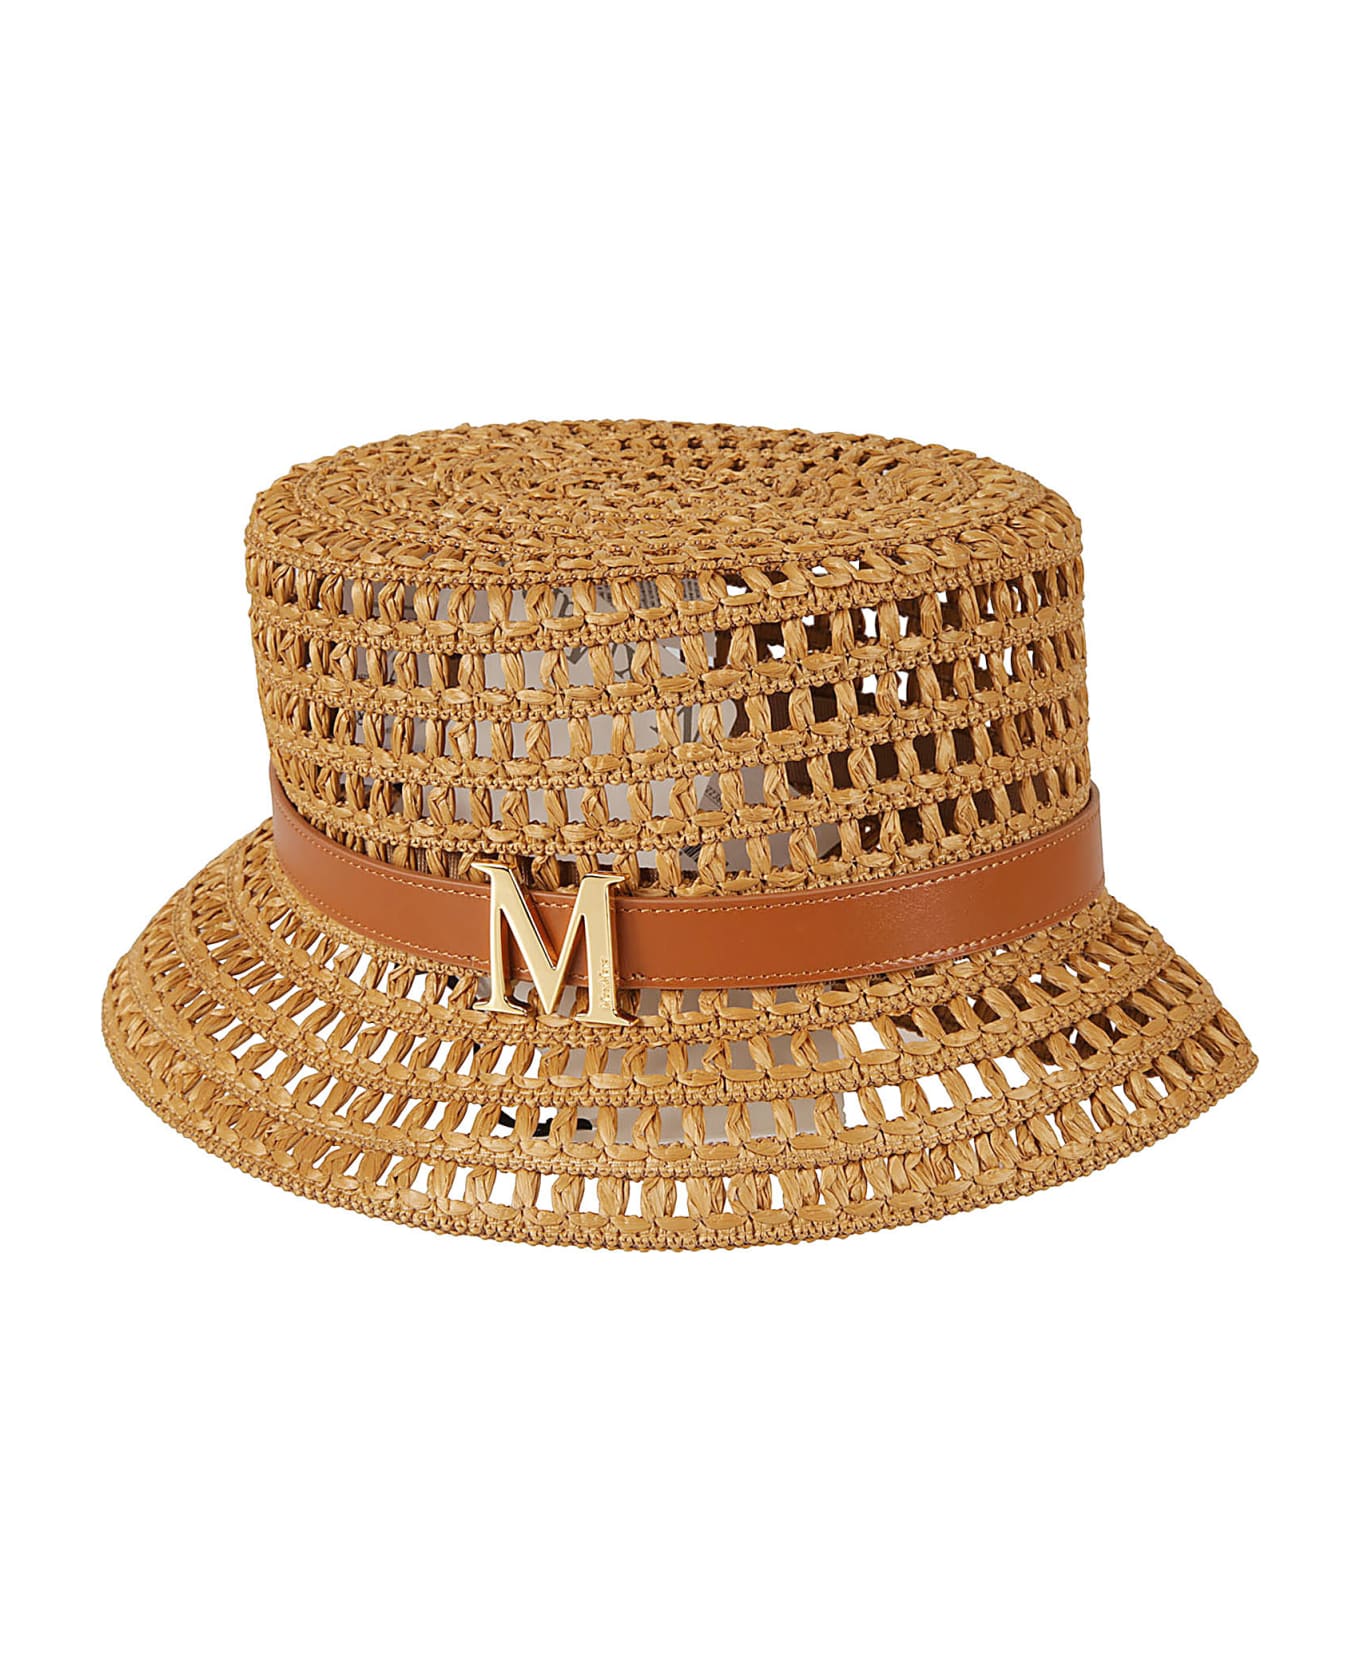 Max Mara Logo Plaque Perforated Woven Hat - BROWN